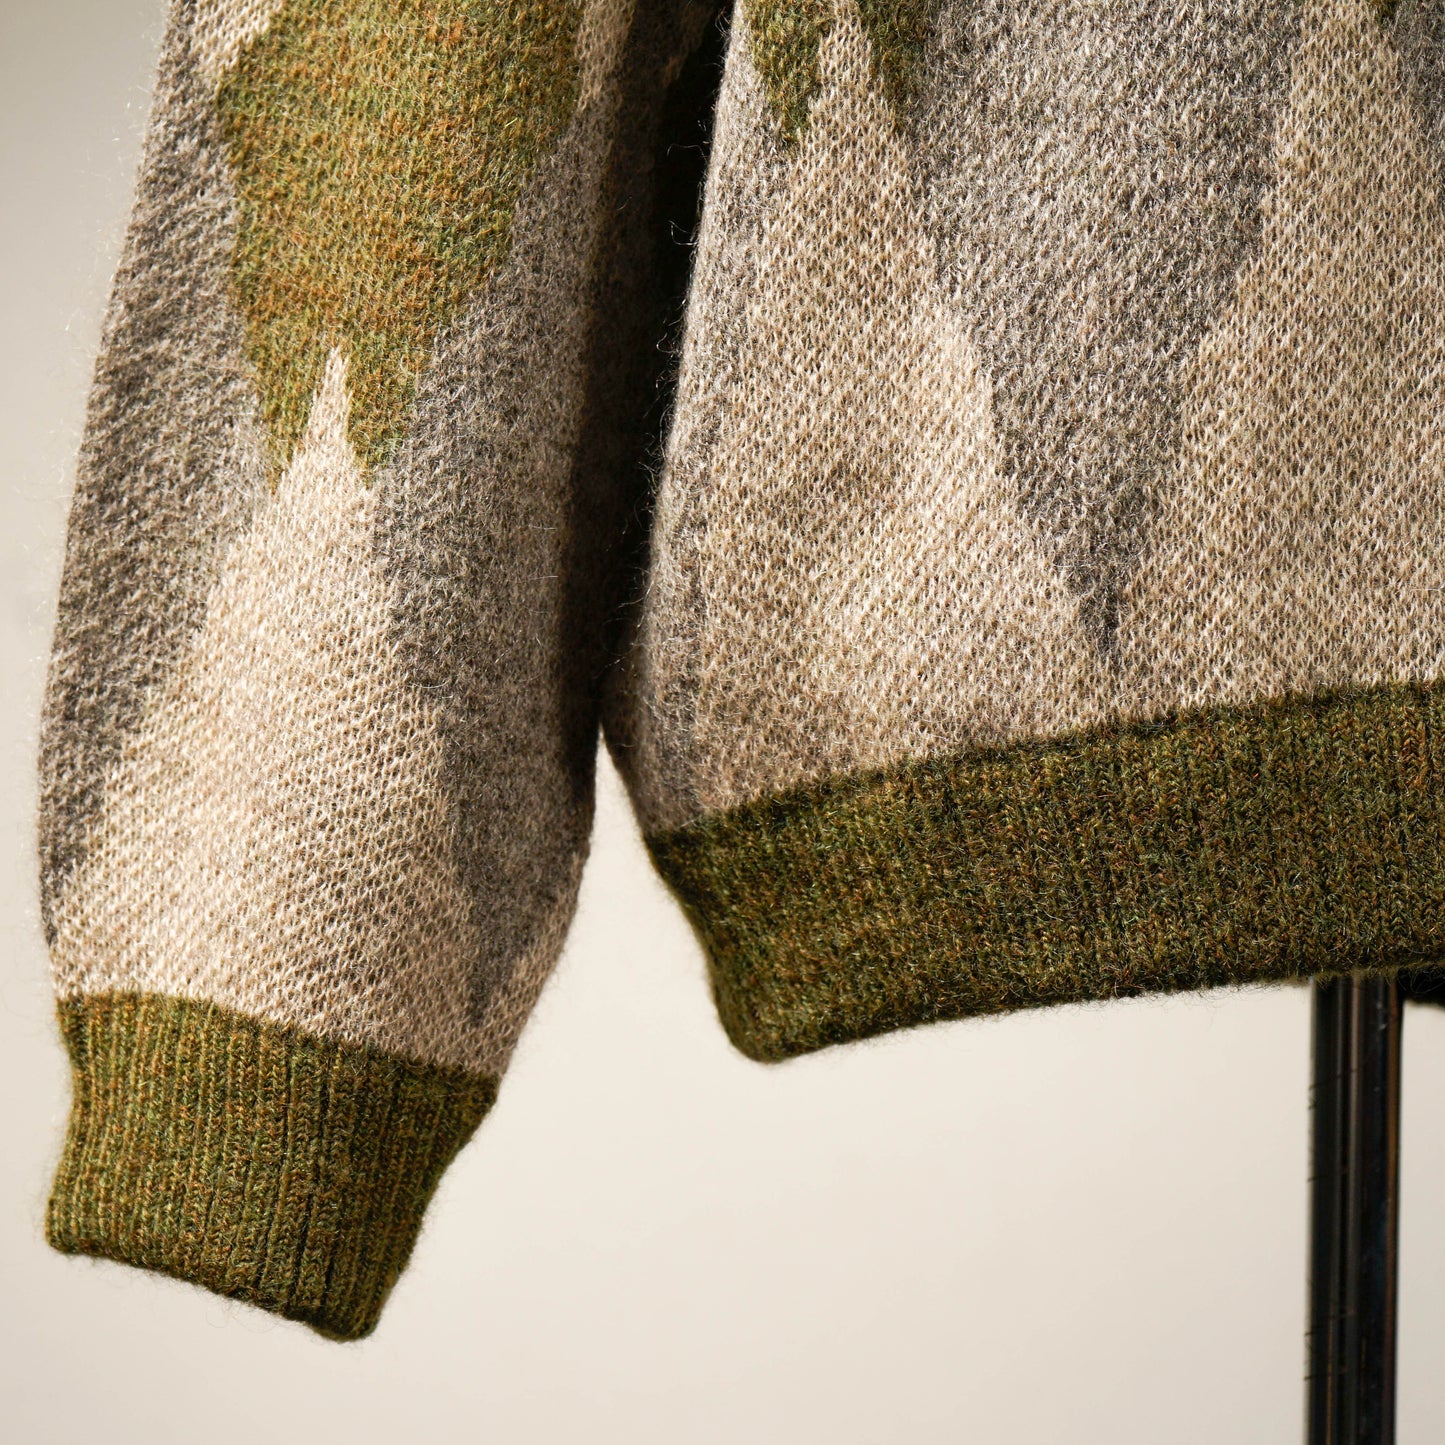 DEVIL'S HOLIDAY - MOHAIR CREW NECK SWEATER  / GSV-22-AW-19